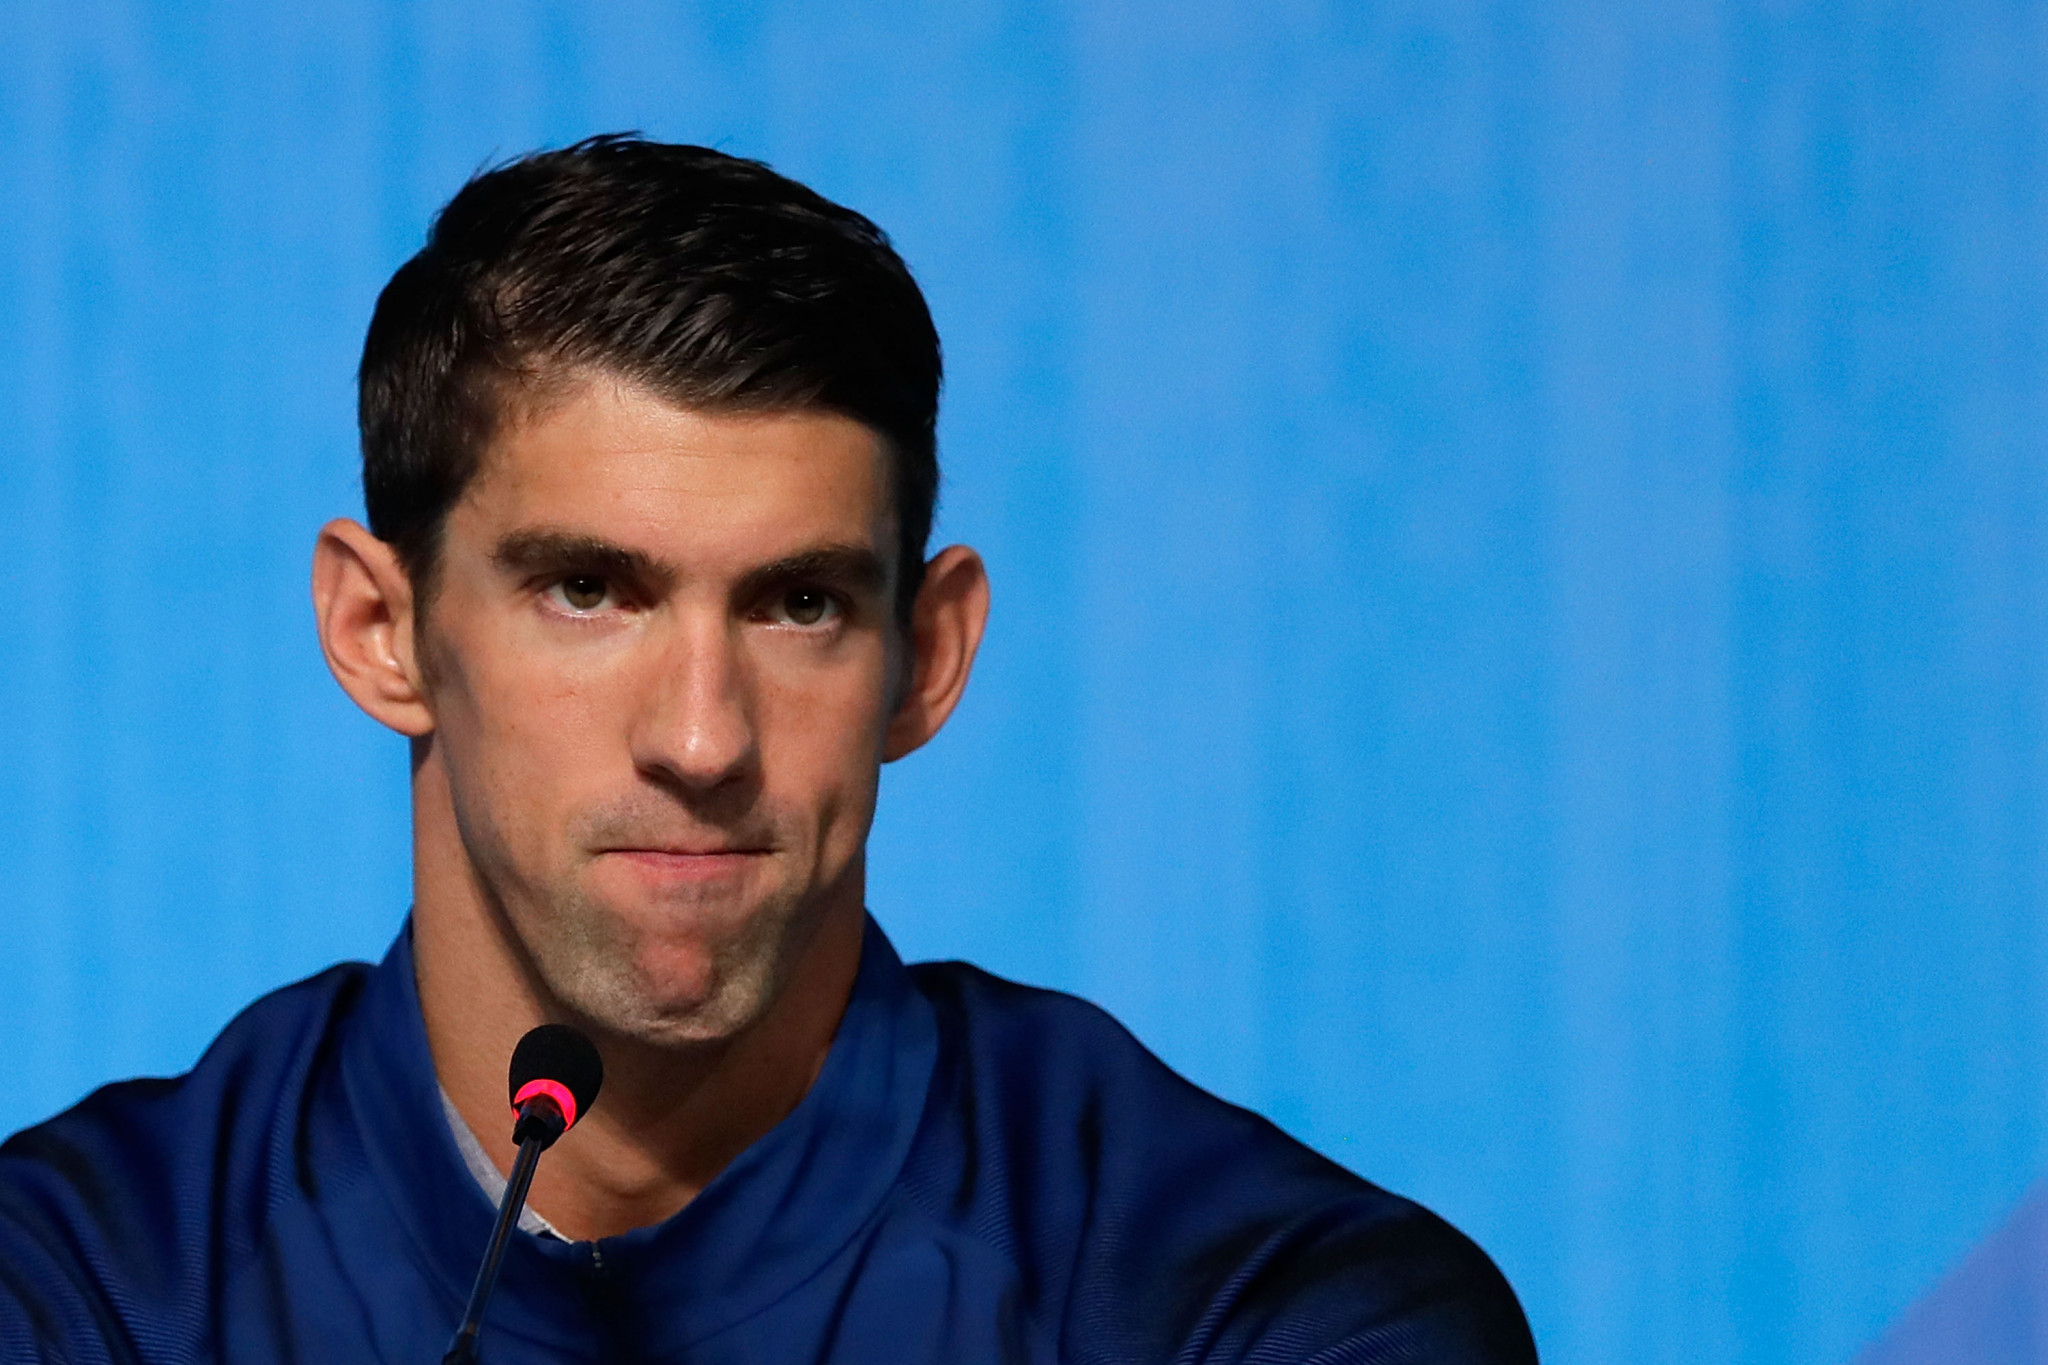 Olympic swimming legend Phelps doubtful of "clean field" at Tokyo 2020